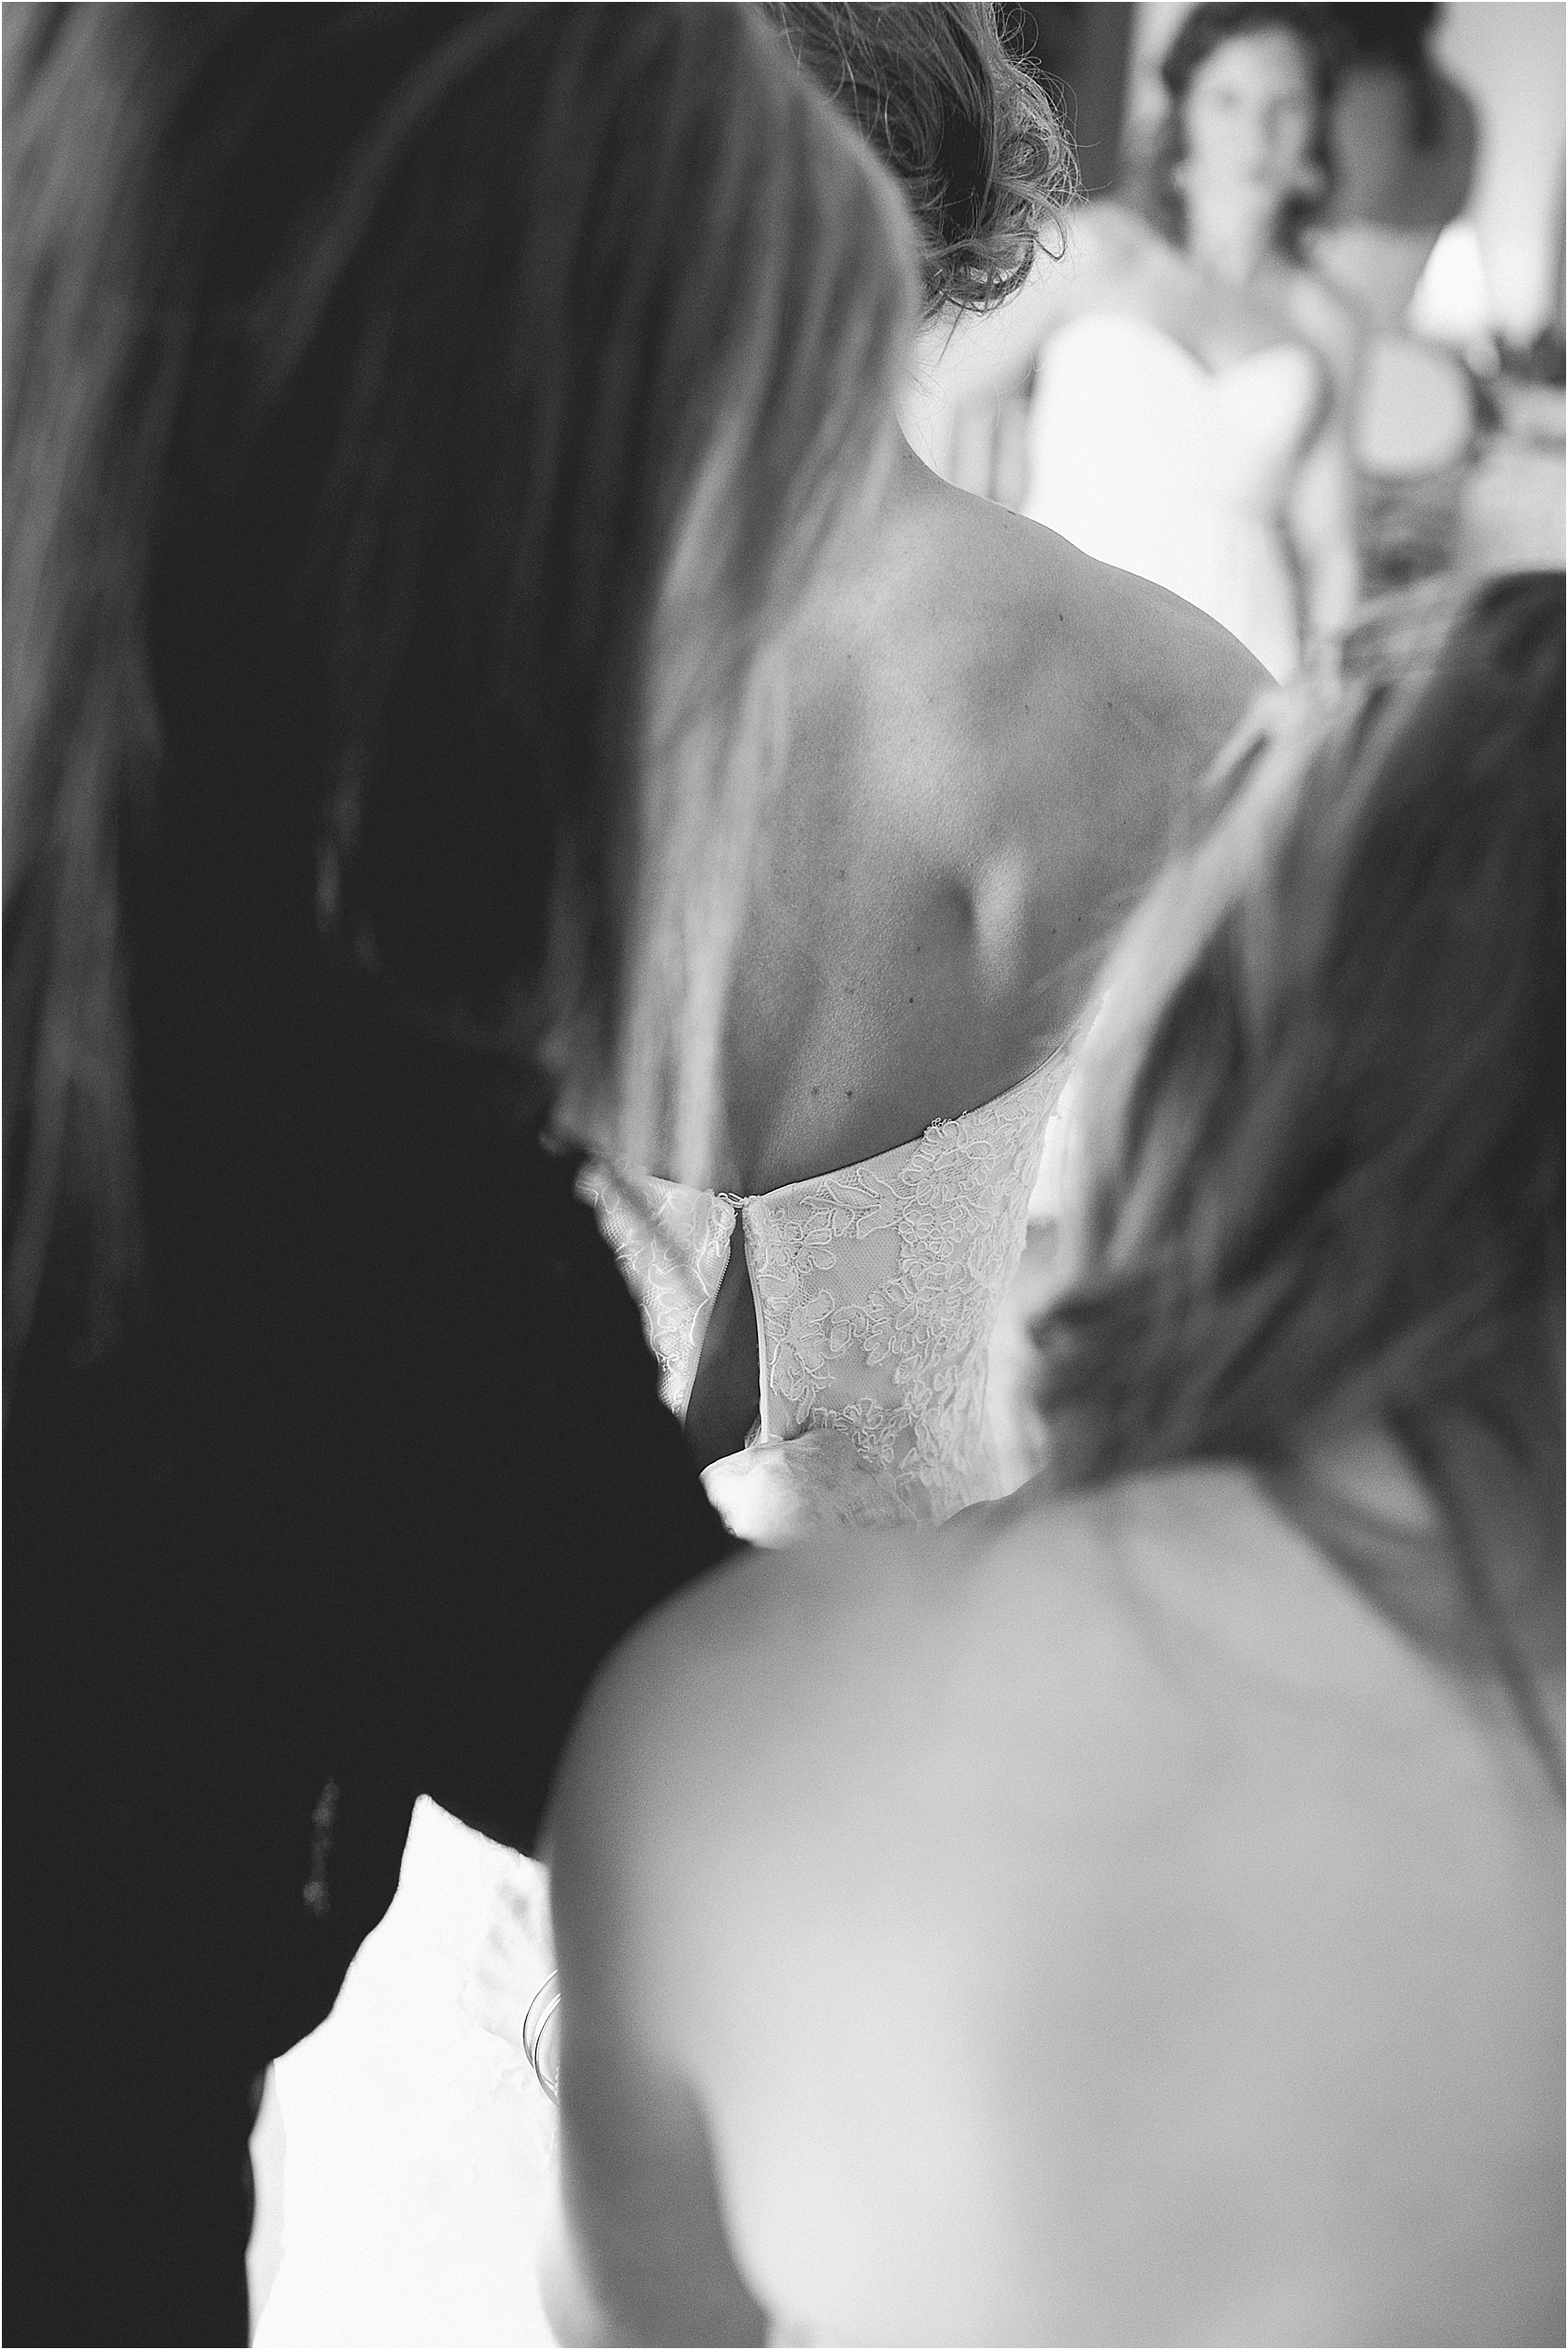 the back of the dress during their wedding at the Historic Rural Hill wedding ceremony and reception in Huntersville nc